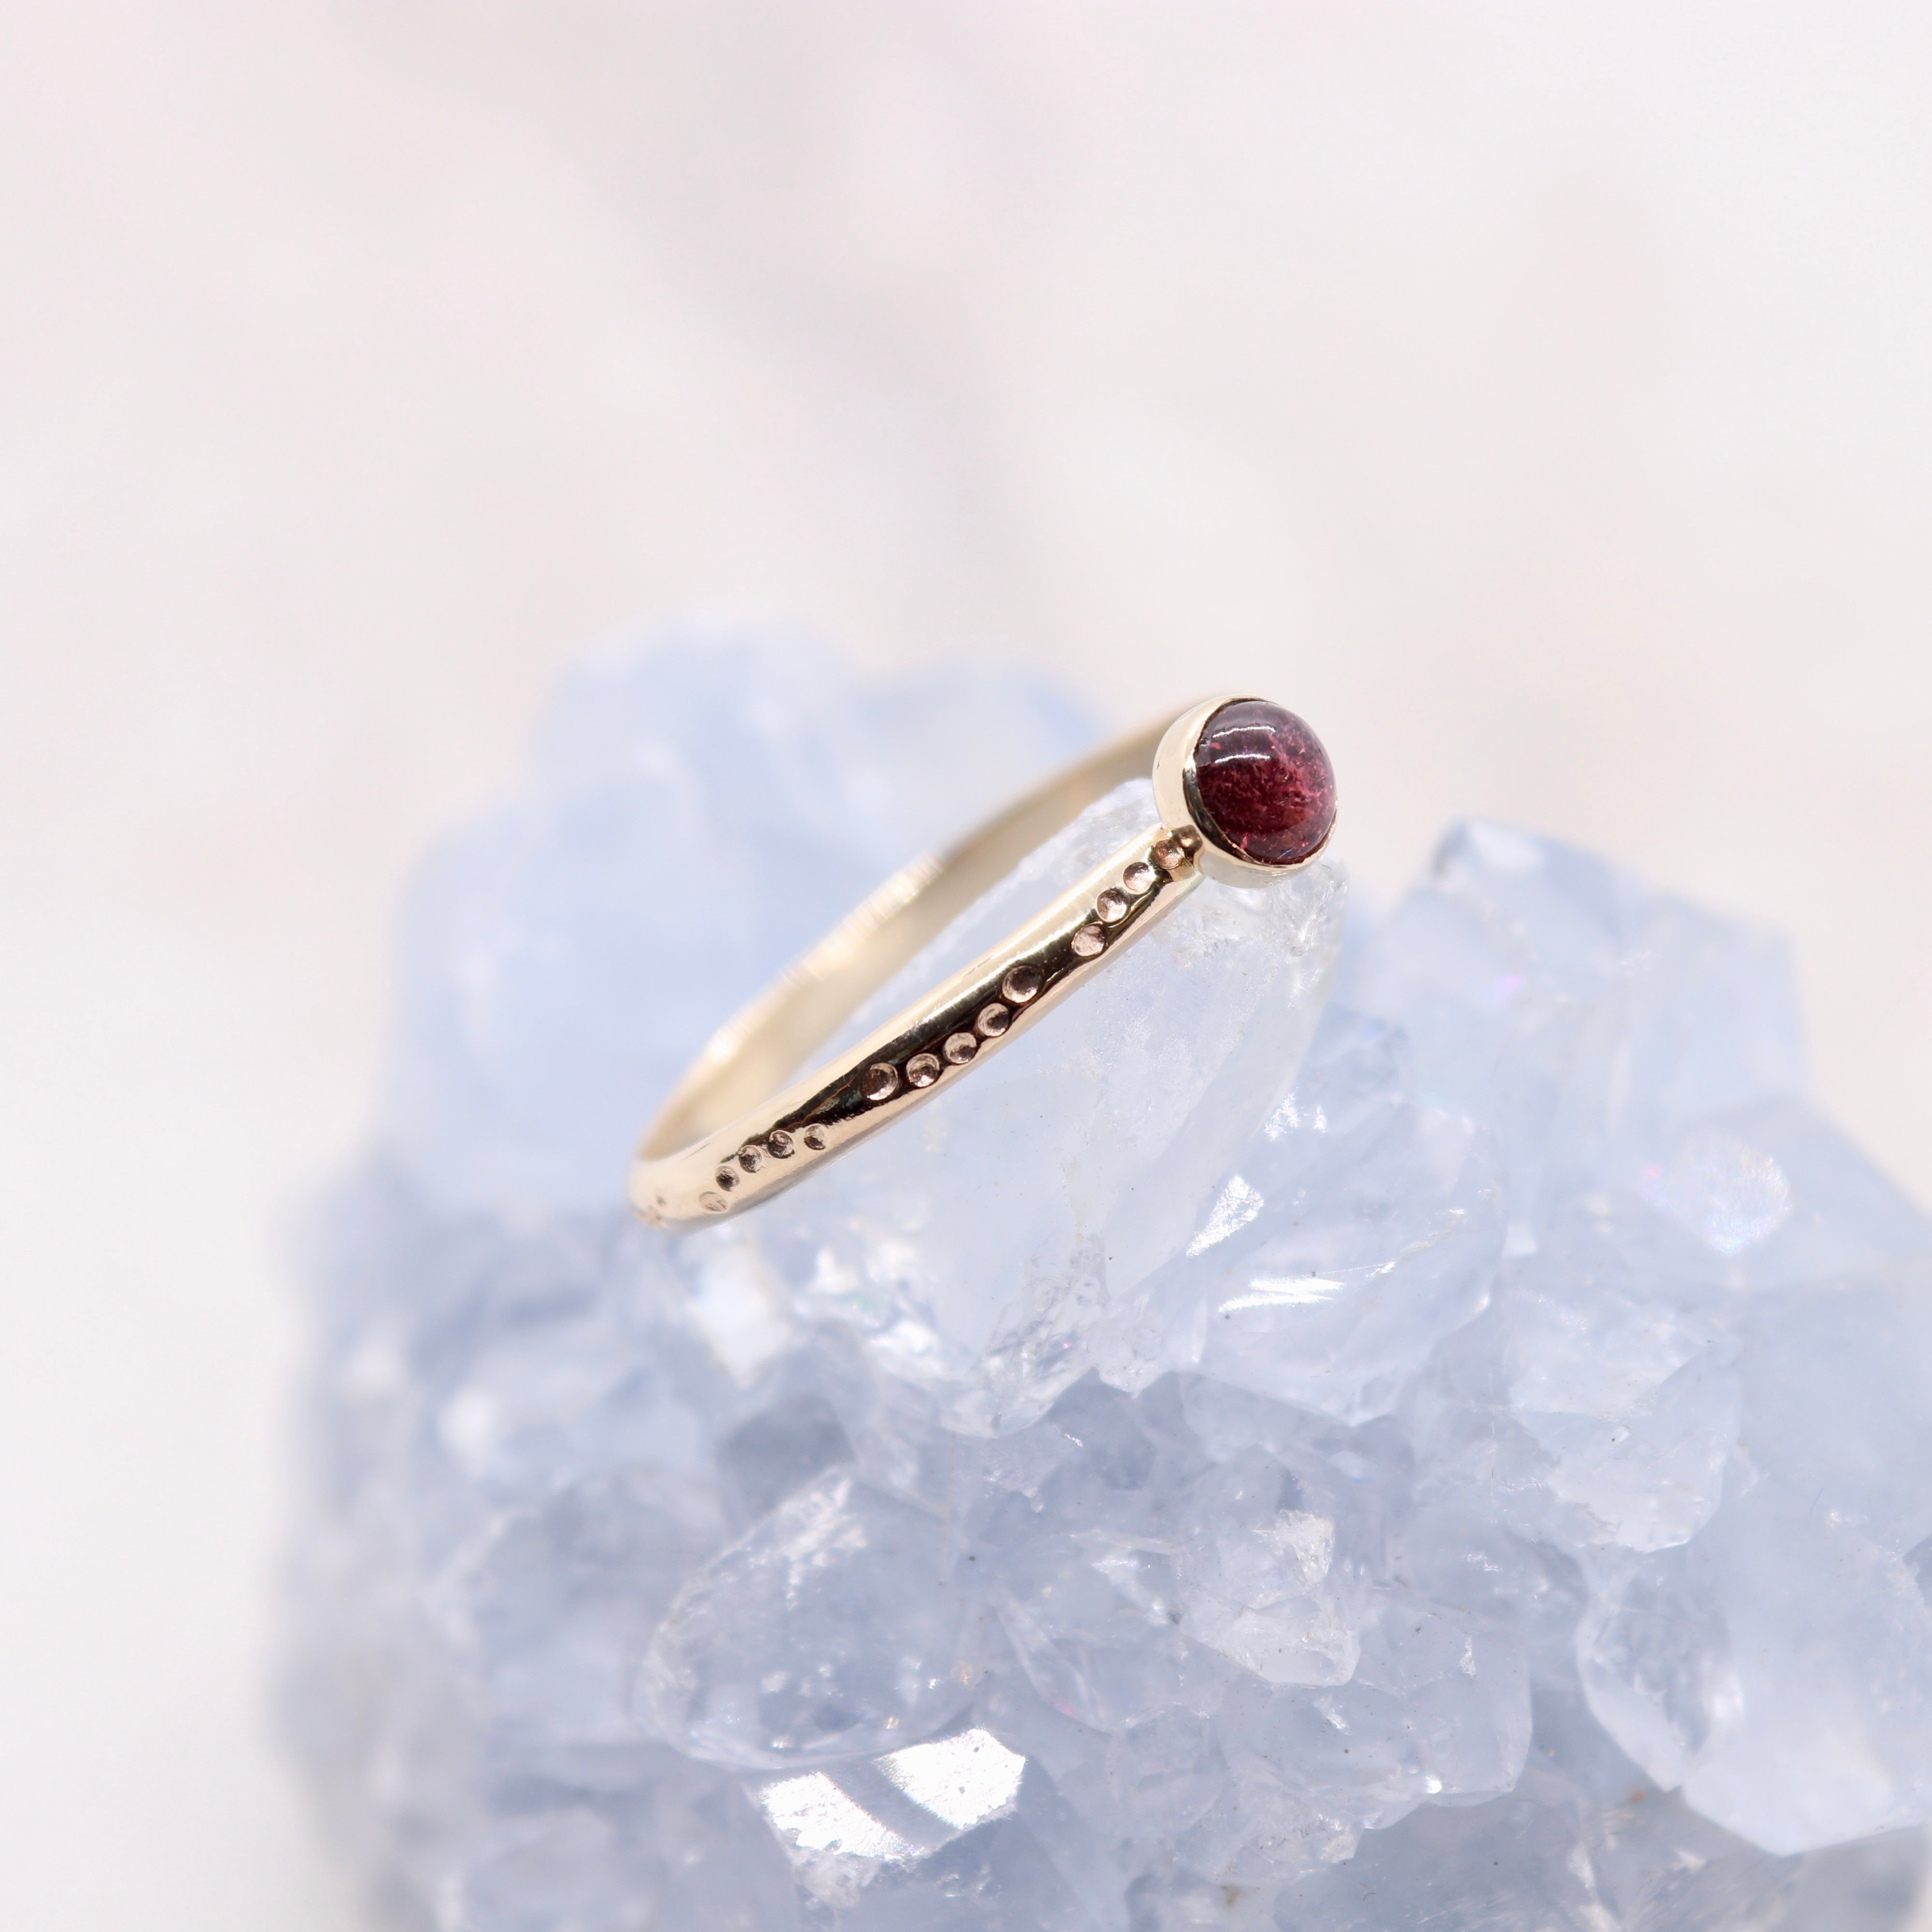 Pink tourmaline gemstone on a solid 14k gold ring band, a unique alternative engagement ring